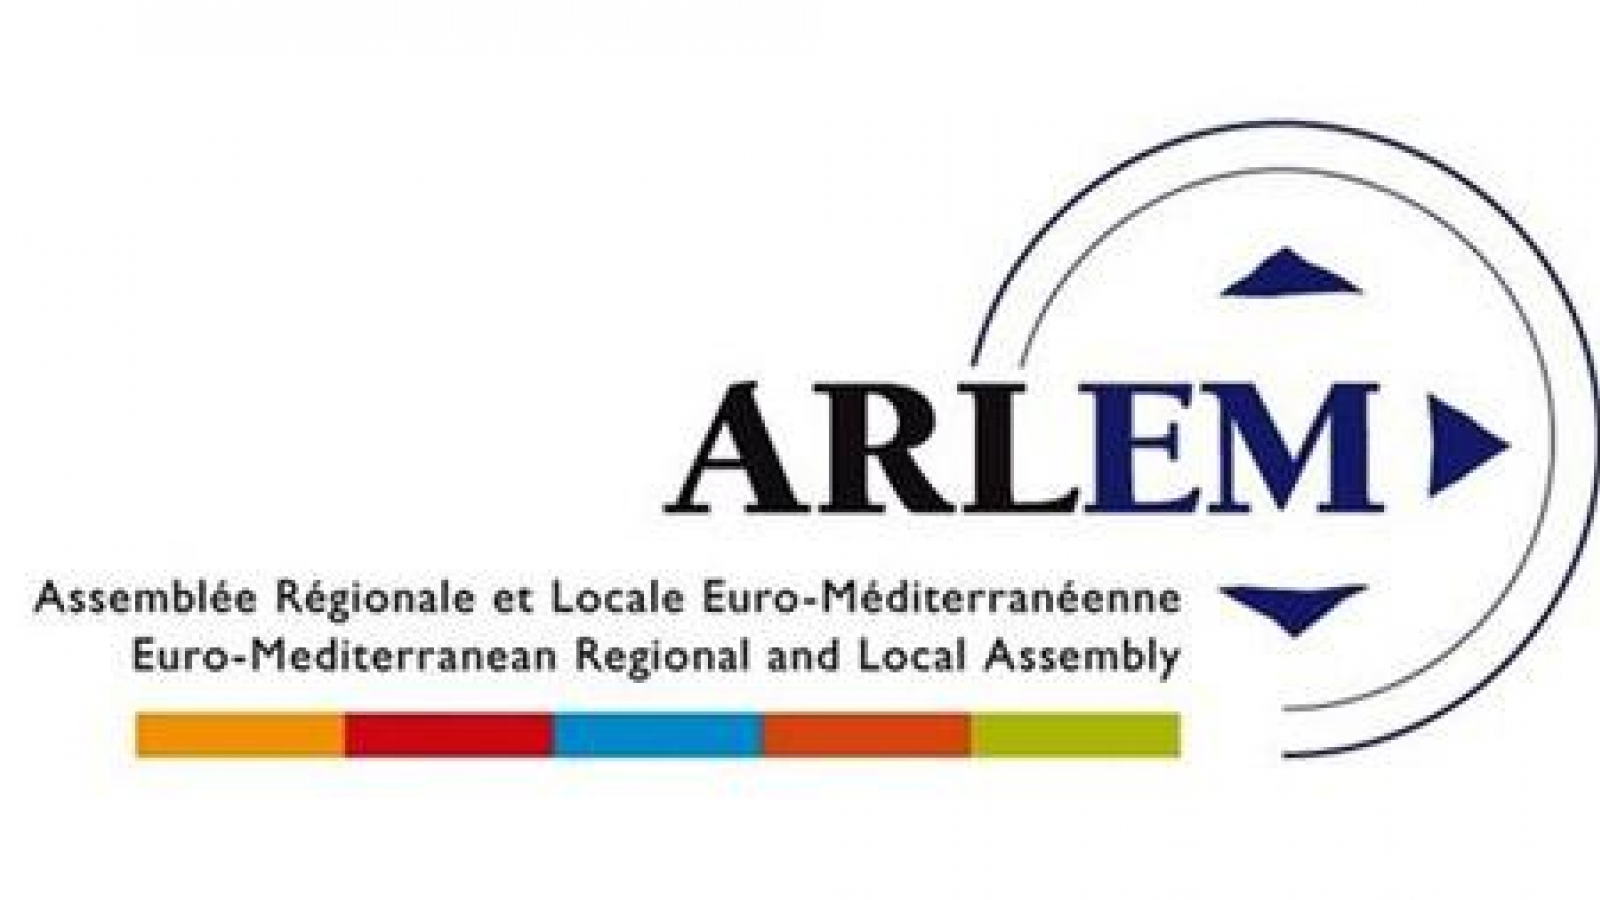 The 10th anniversary of the Regional and Local Mediterranean Assembly will be held in 2019 in Seville